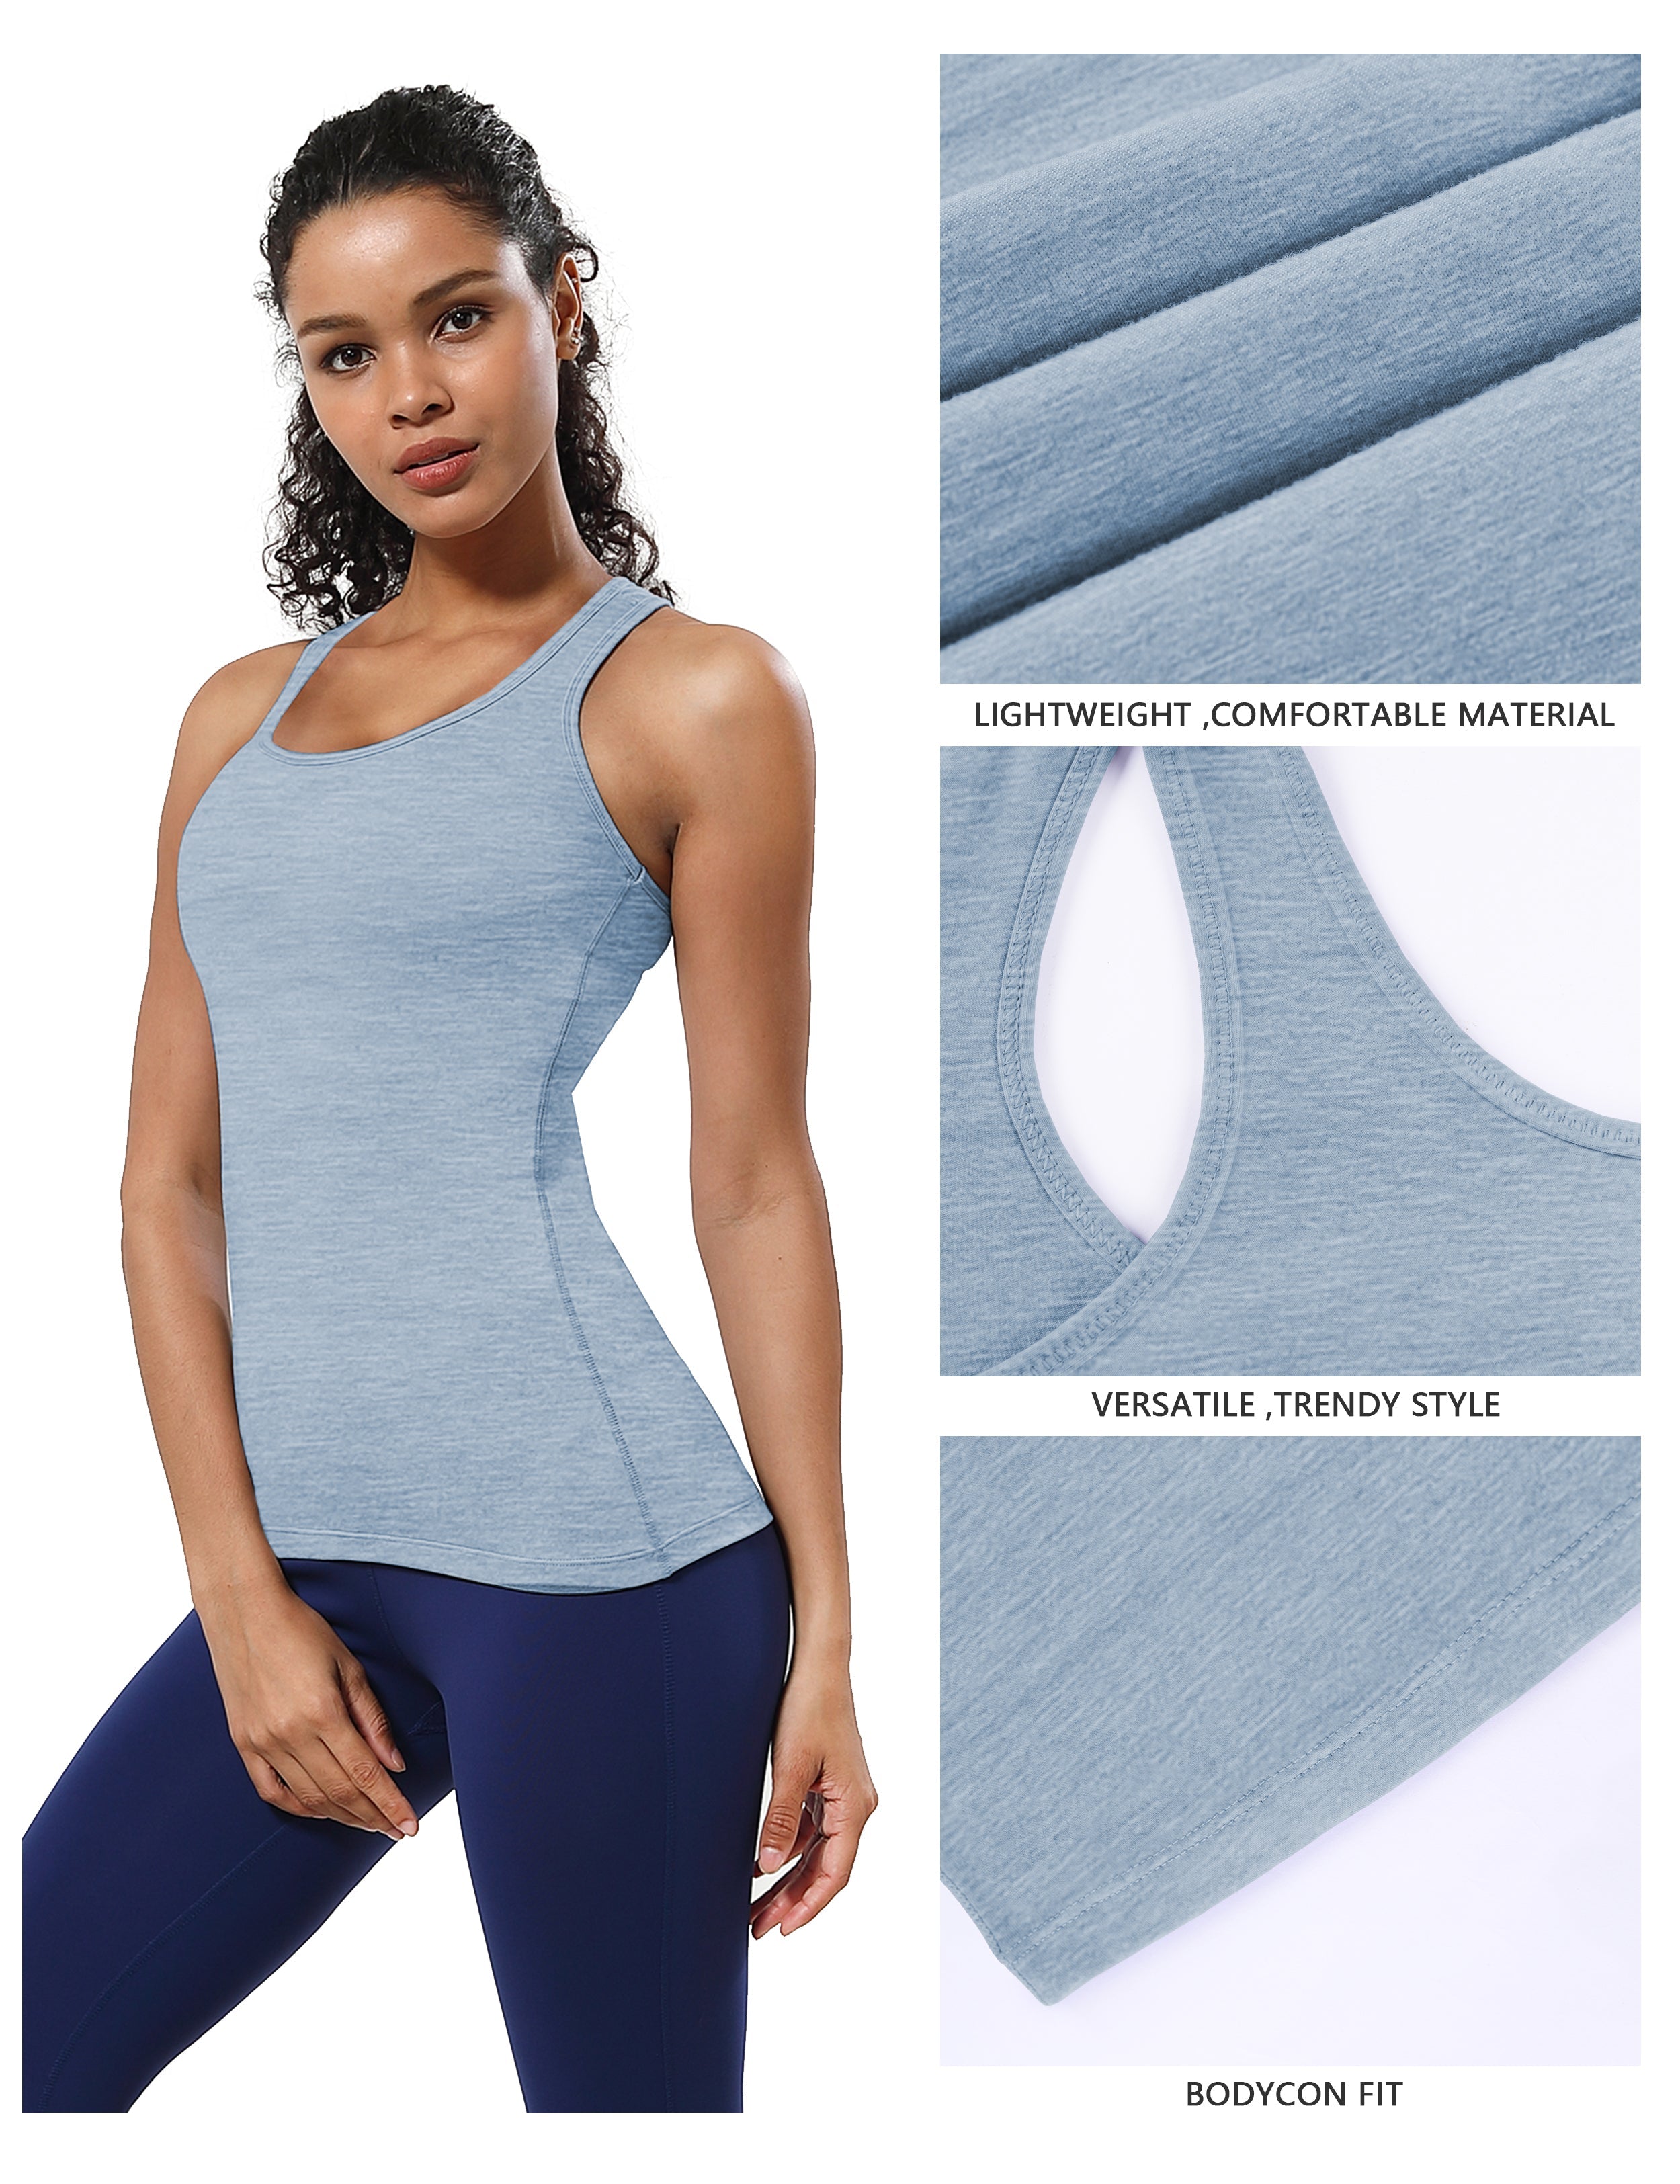 Racerback Athletic Tank Tops heatherblue 92%Nylon/8%Spandex(Cotton Soft) Designed for Golf Tight Fit So buttery soft, it feels weightless Sweat-wicking Four-way stretch Breathable Contours your body Sits below the waistband for moderate, everyday coverage